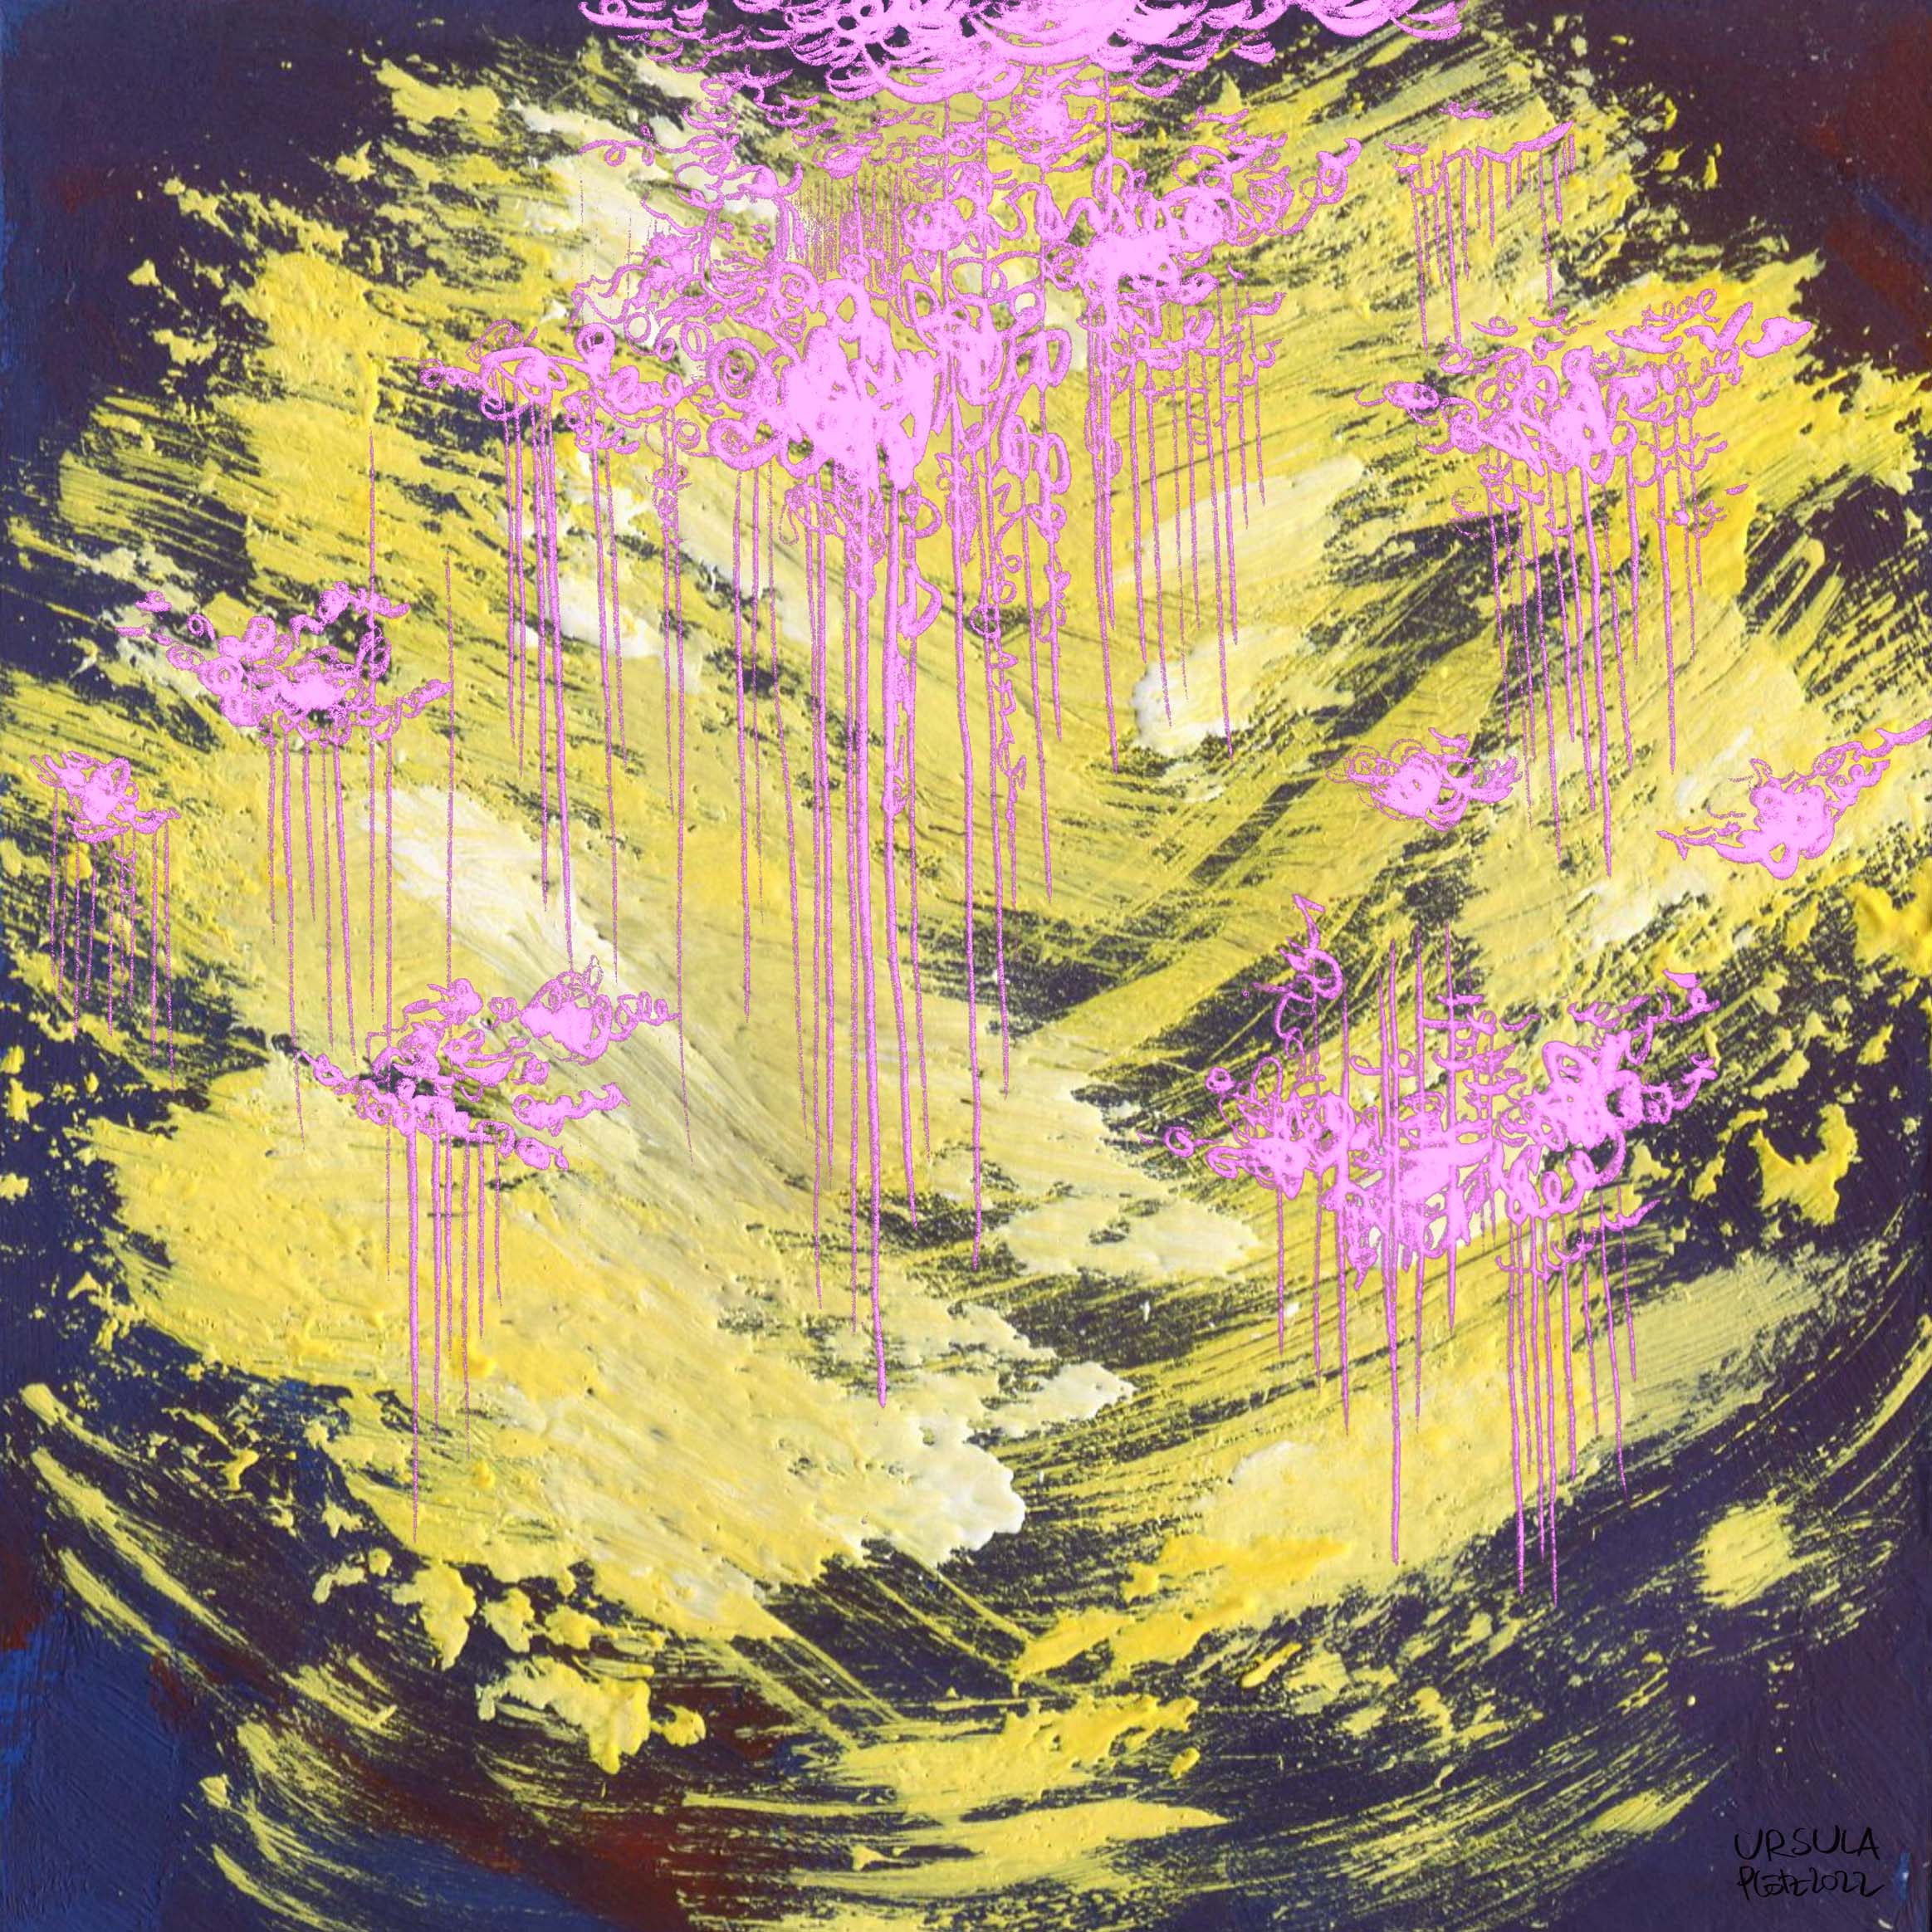 Bright yellow free form on dark blue reddish background with bright nearly neon pink lines on it like clouds (gouache and digital)